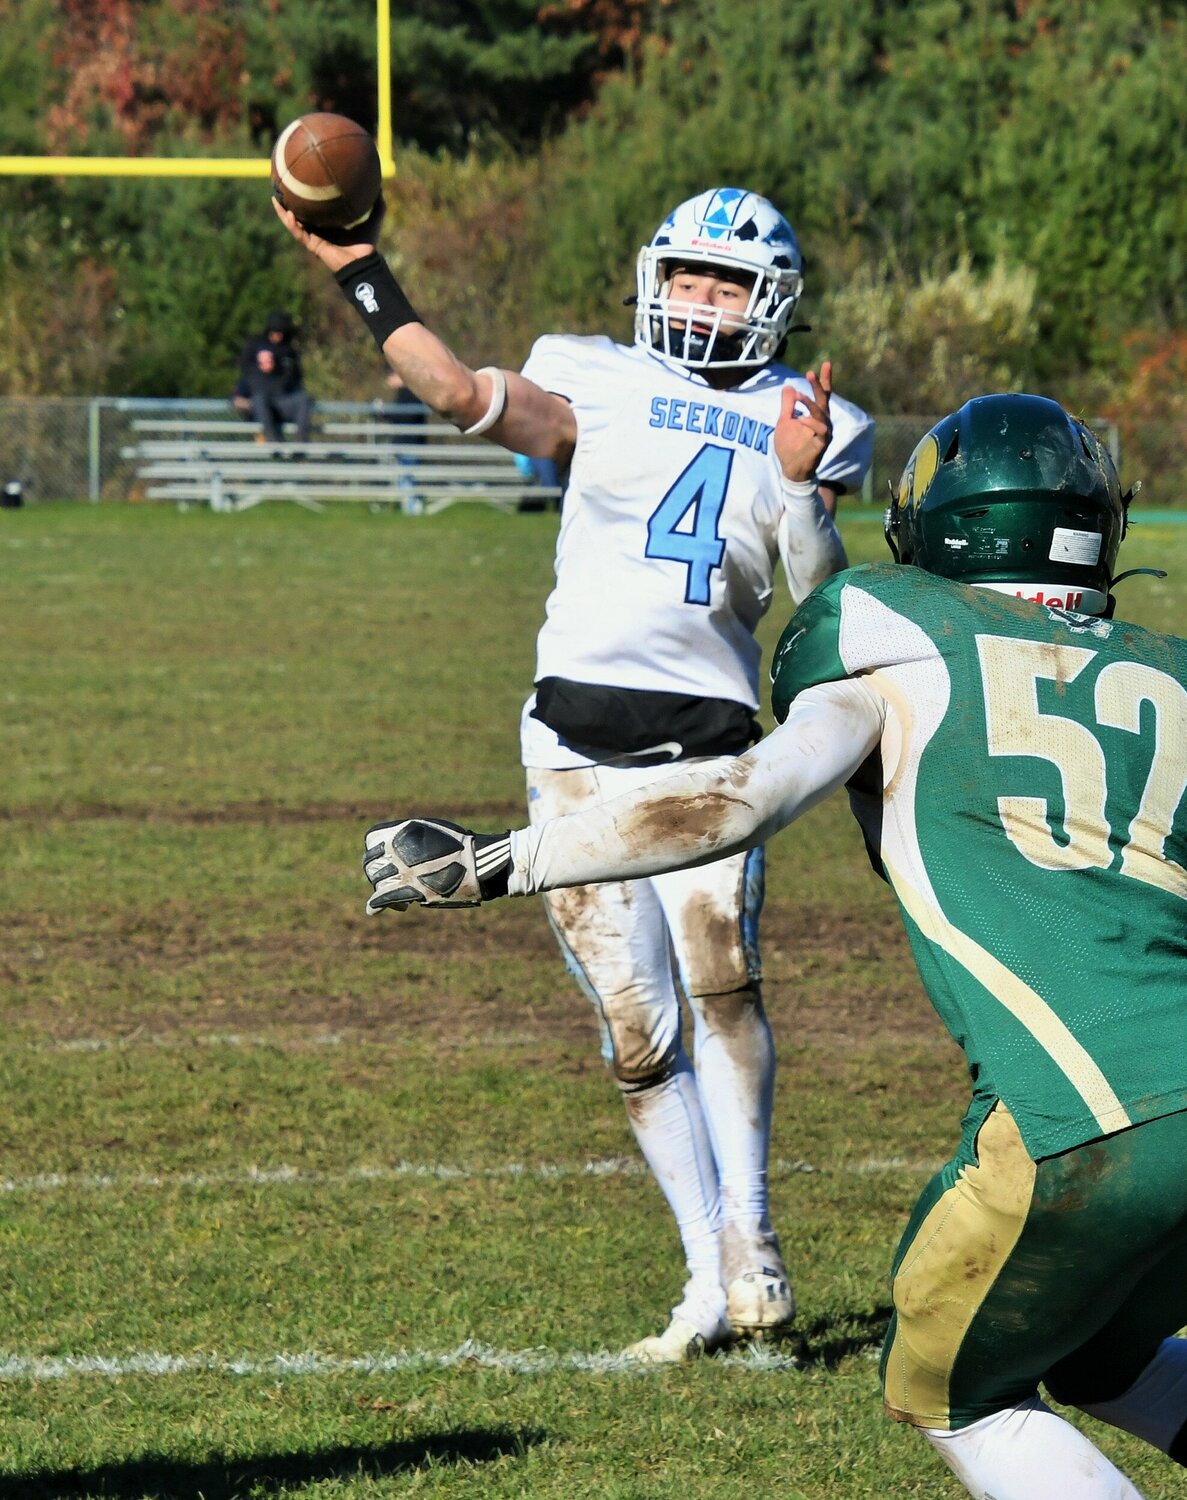 Seekonk's Christian Cabral fires a pass for two-point conversion.